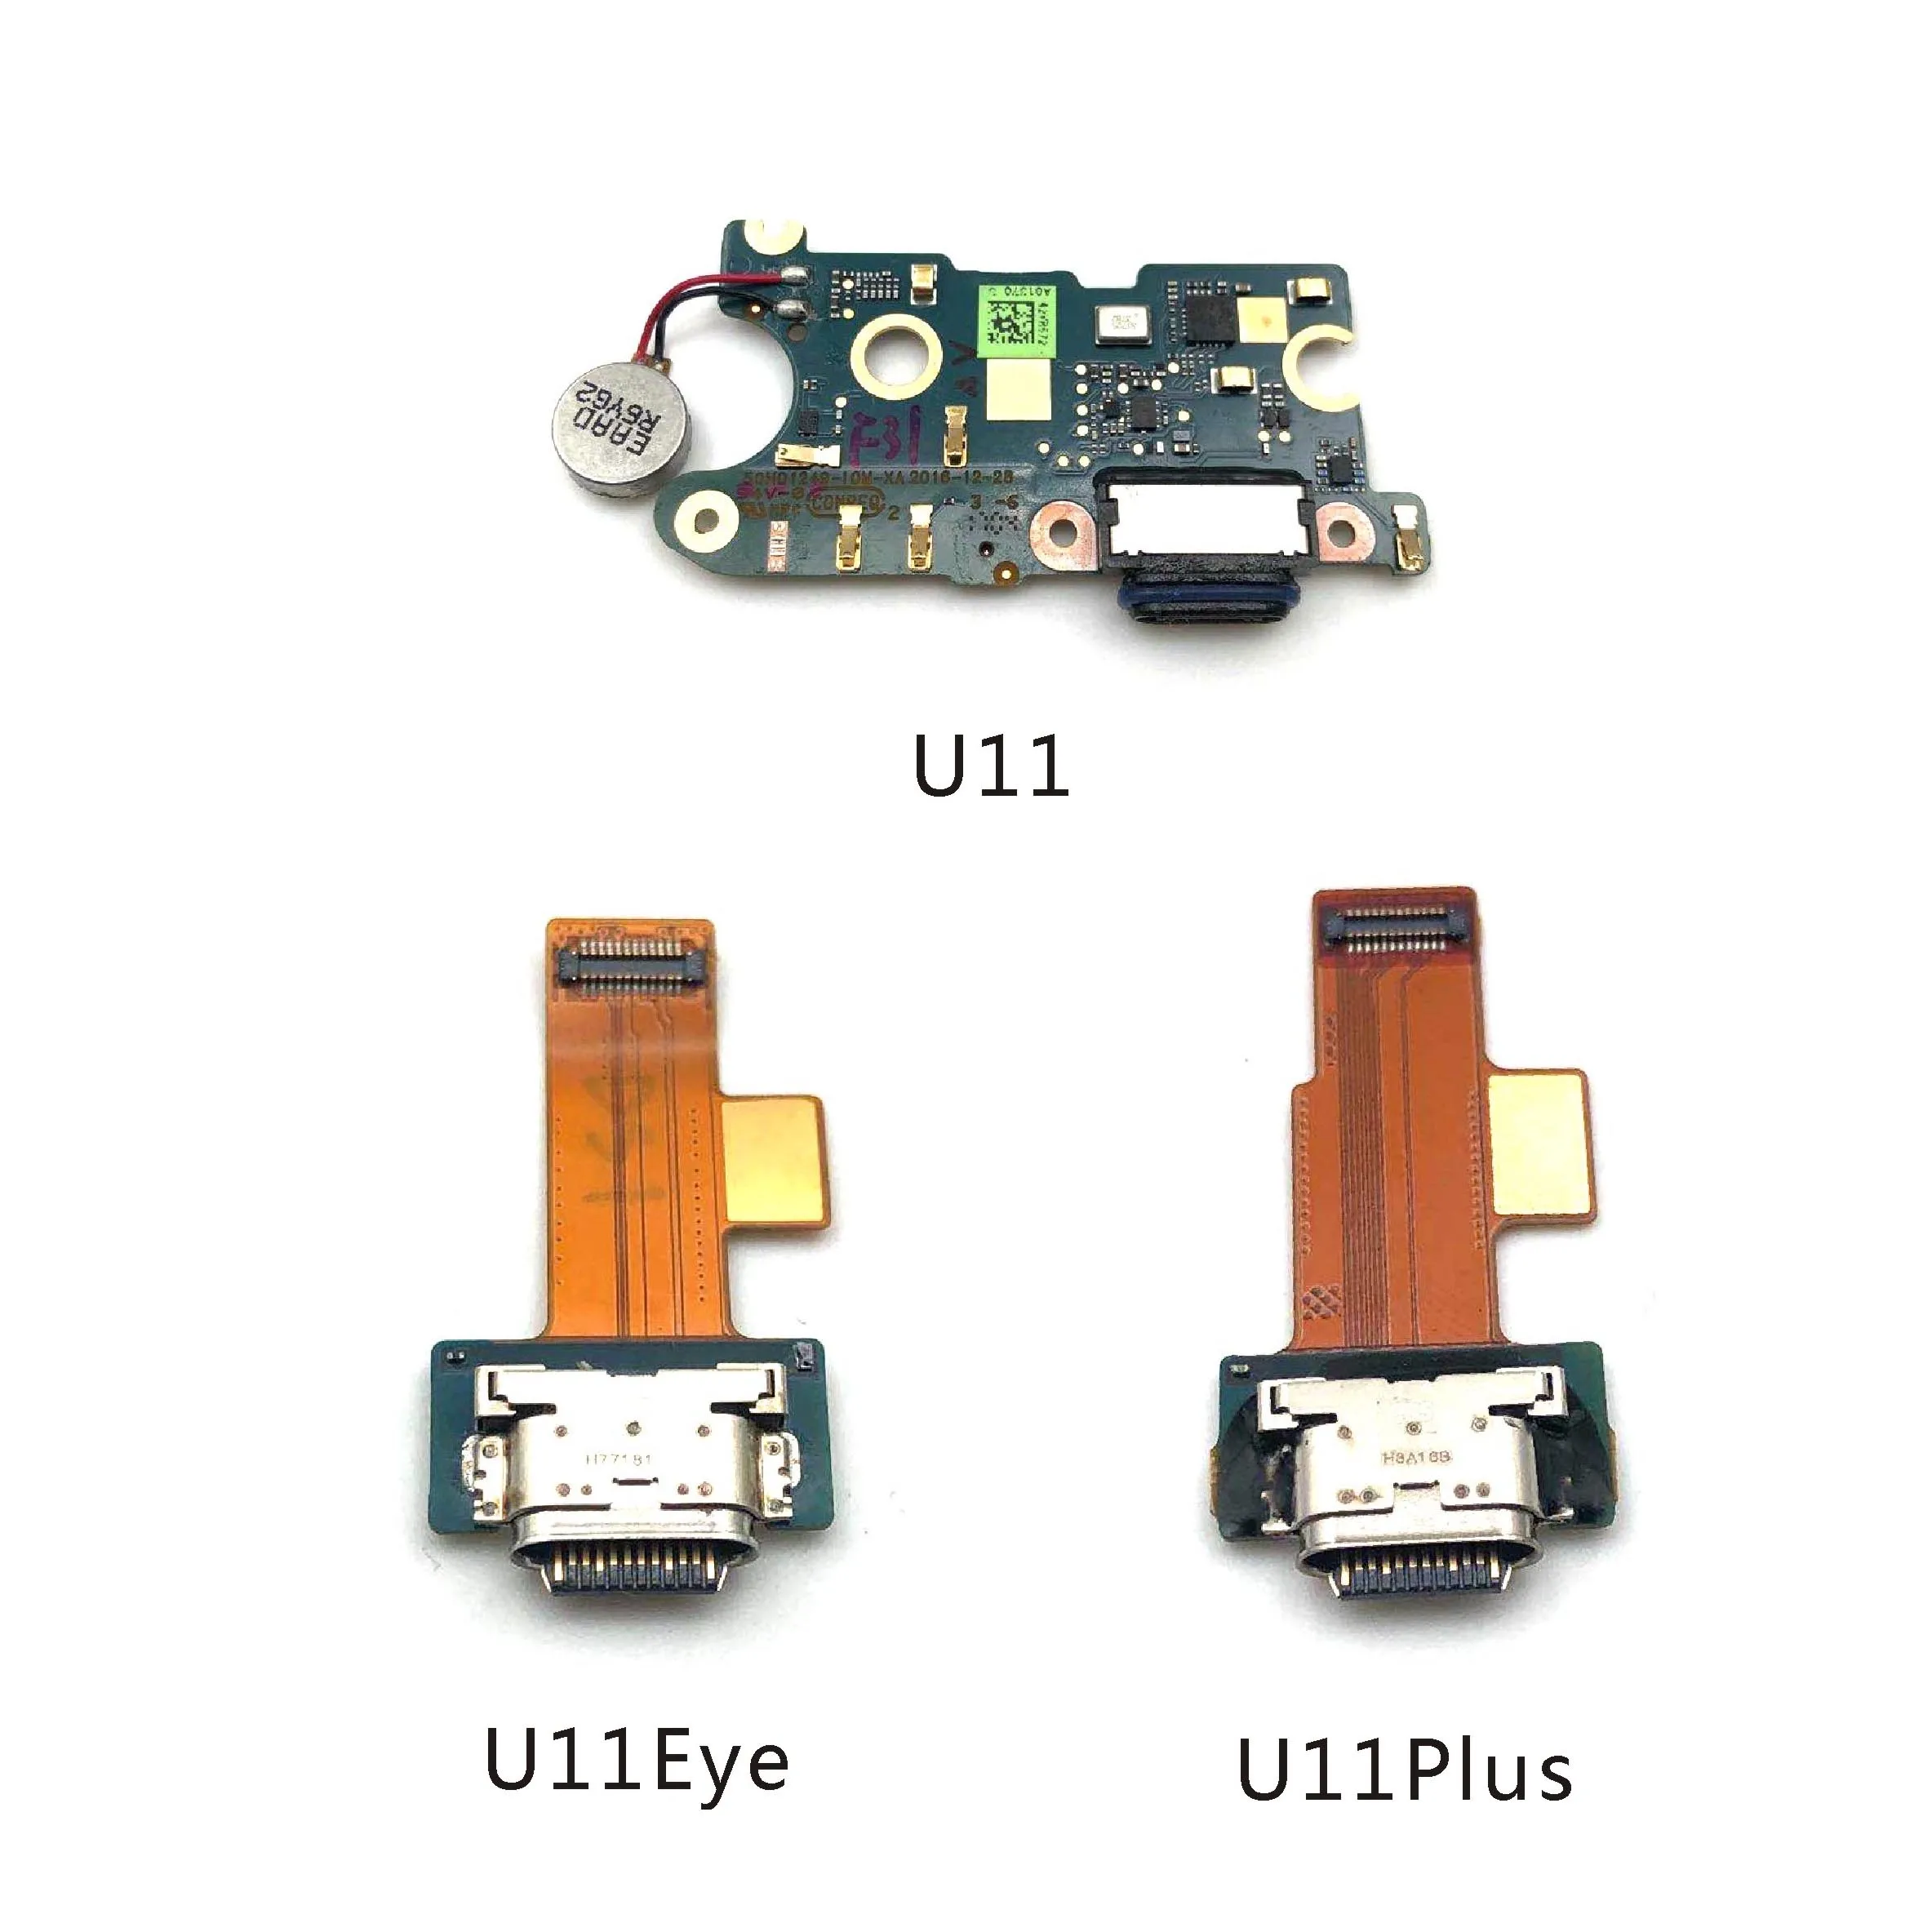 

USB Micro Charger Connector Microphone Board Flex Cable For HTC U11 + U11Eye U11Life U11Plus Plus Charging Port Dock Replacement